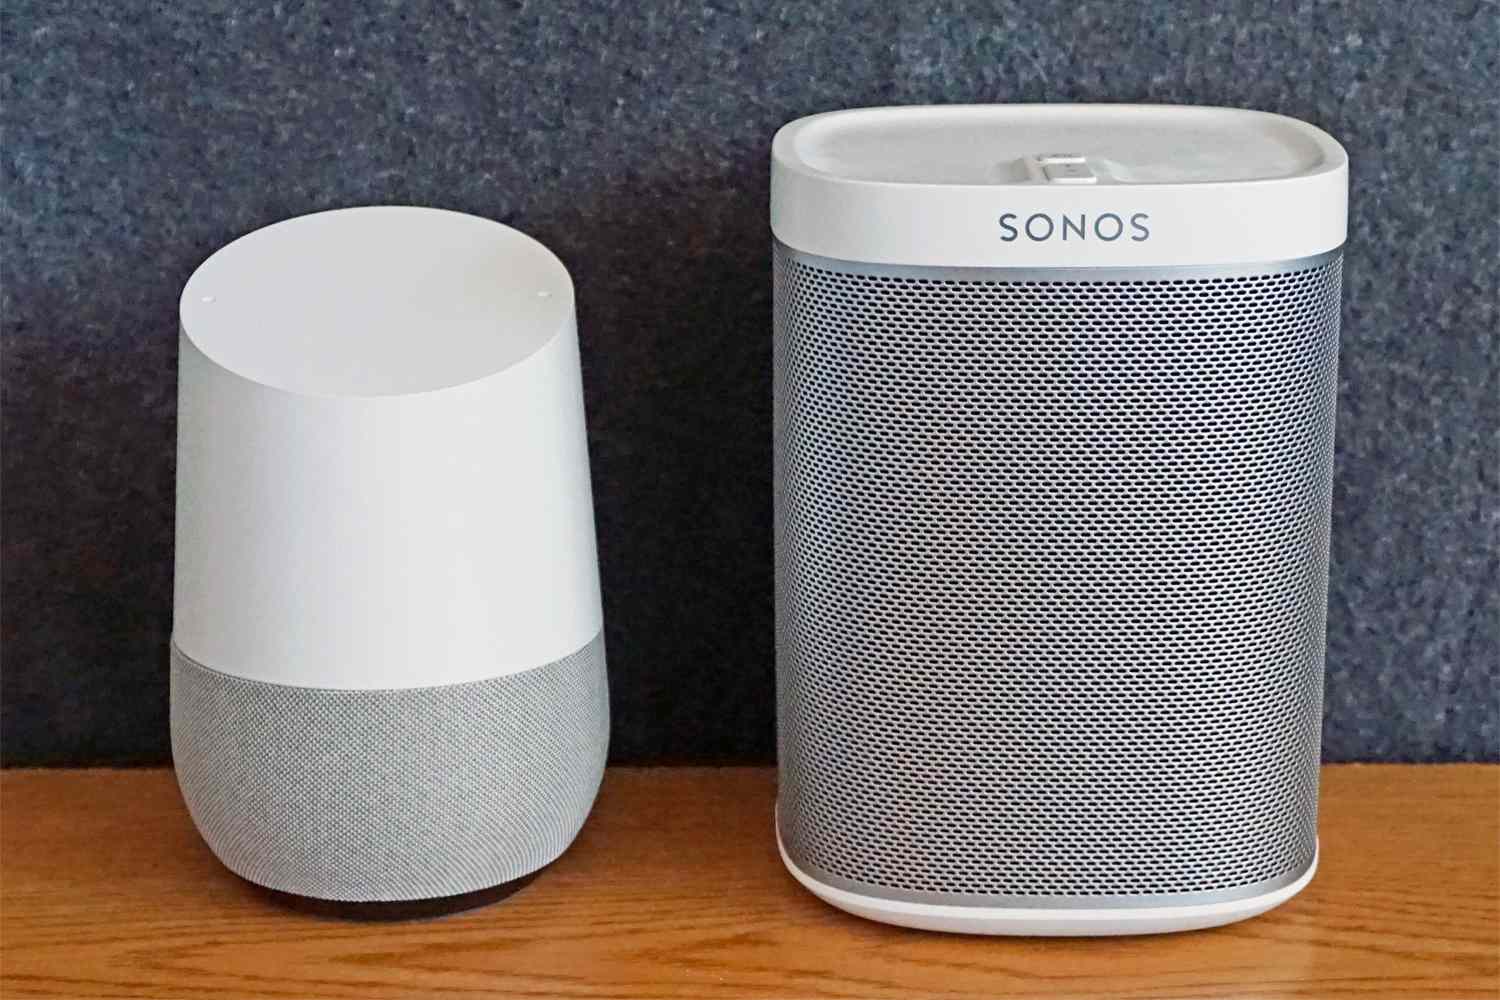 How to Connect Google Home Sonos Speakers - The